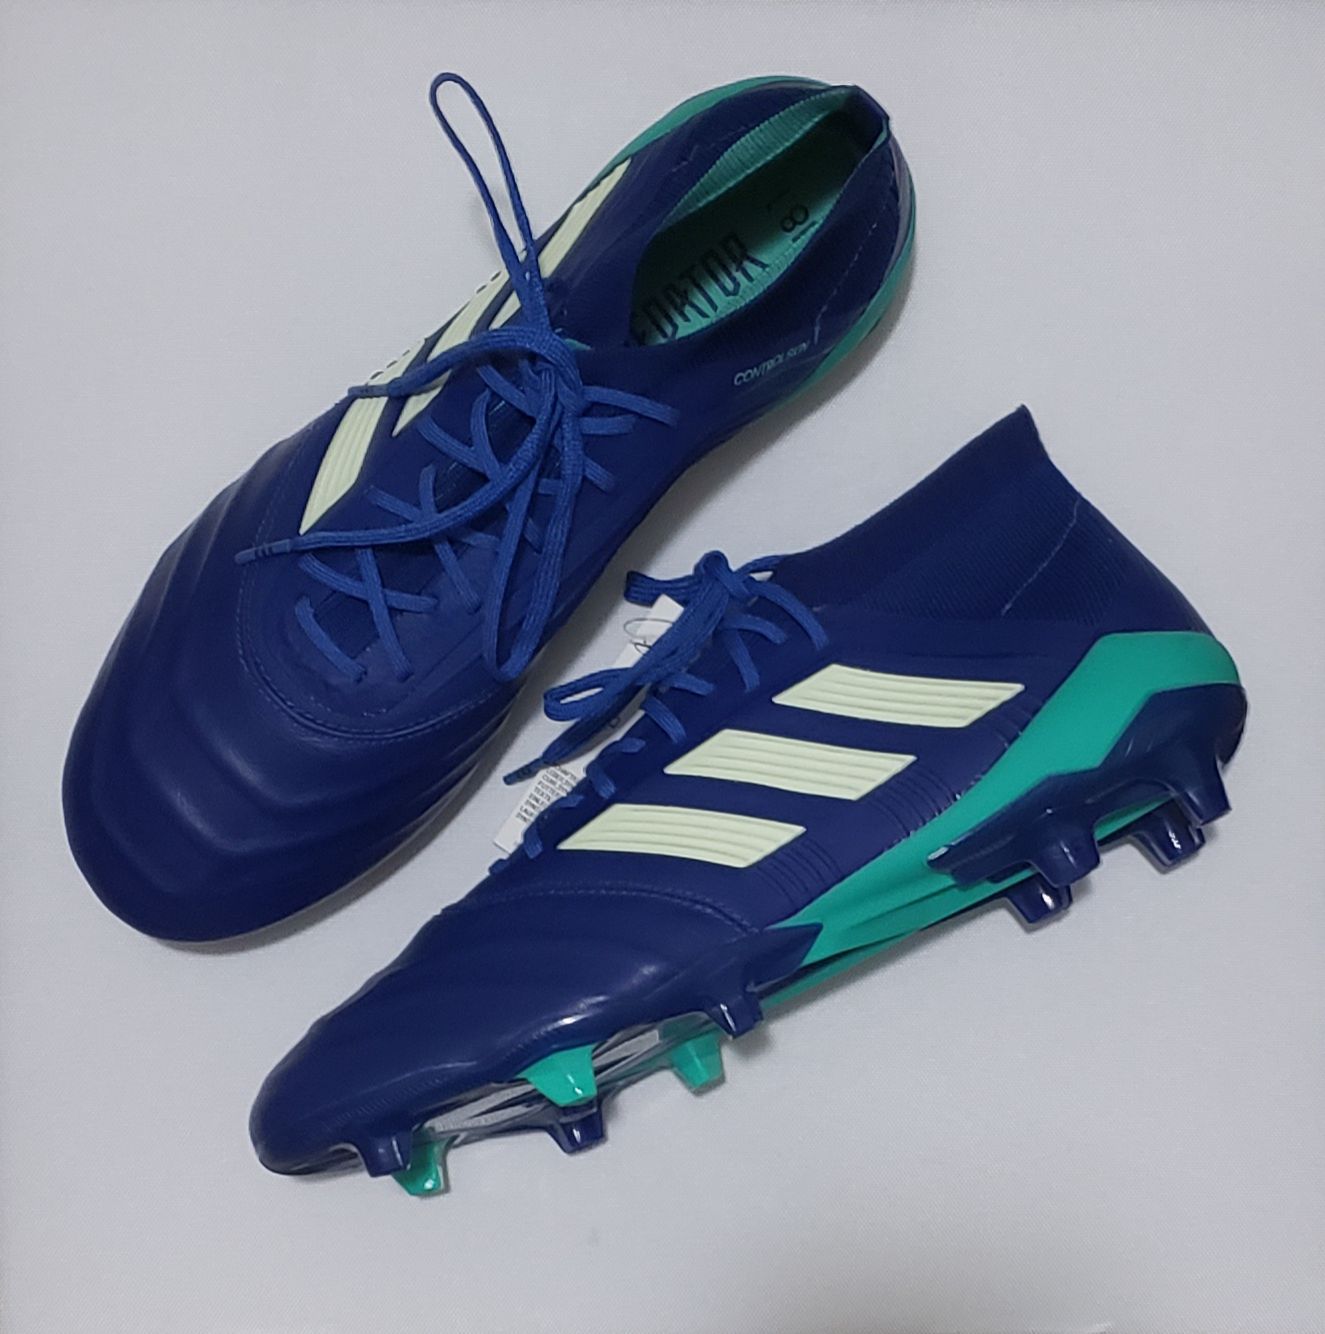 Adidas Predator 18.1 Kangaroo Leather Cleat Football Boot Blue for Sale in Chicago, IL - OfferUp